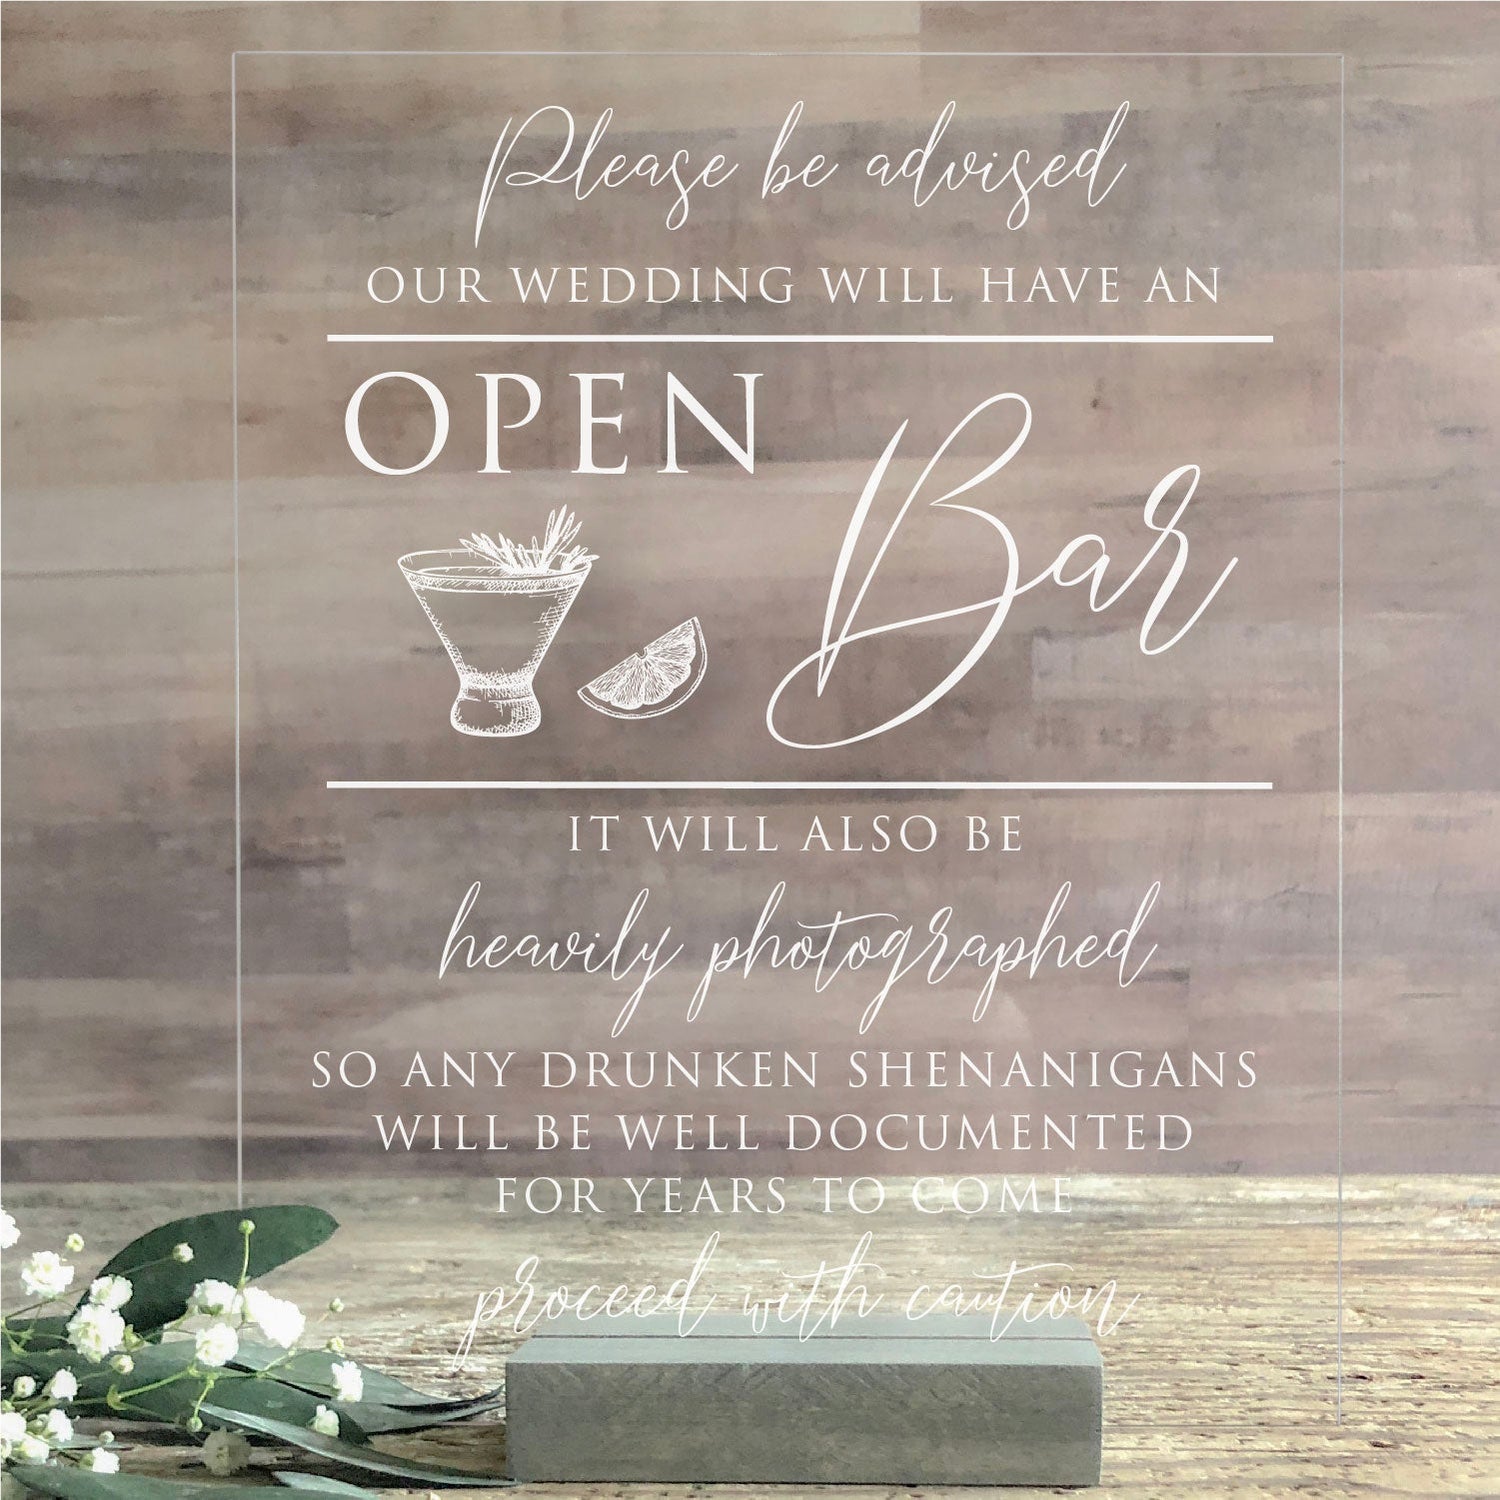 Acrylic Open Bar Sign | Lucite Wedding Sign | Rustic Wedding Decor | SCC-211 - SCC Signs